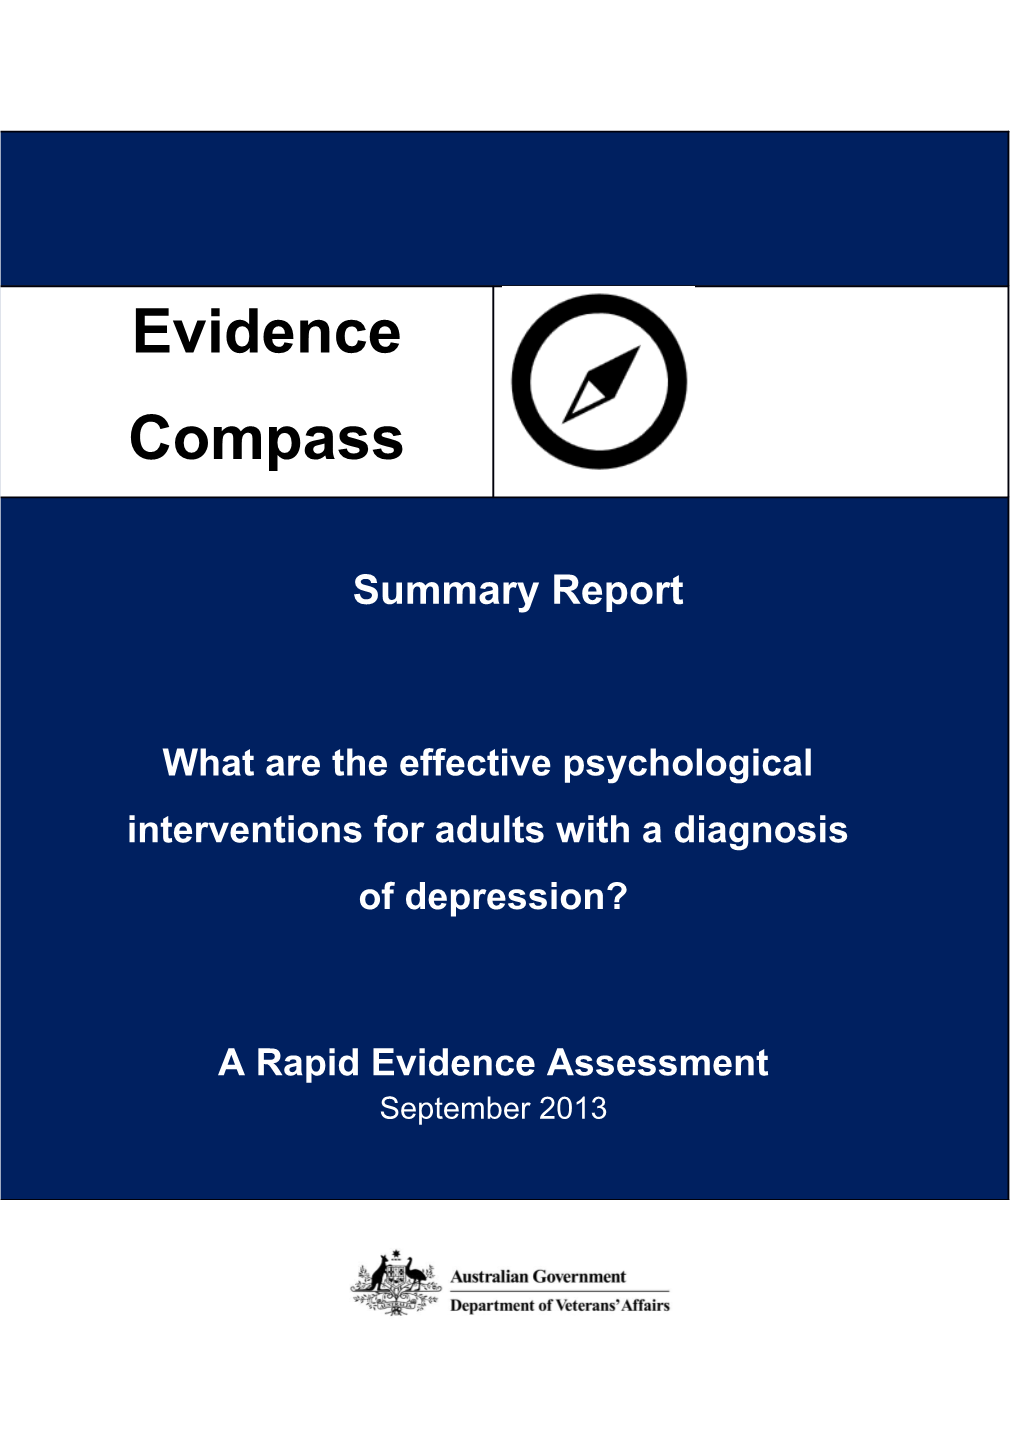 What Are the Effective Psychological Interventions for Adults with a Diagnosis of Depression?